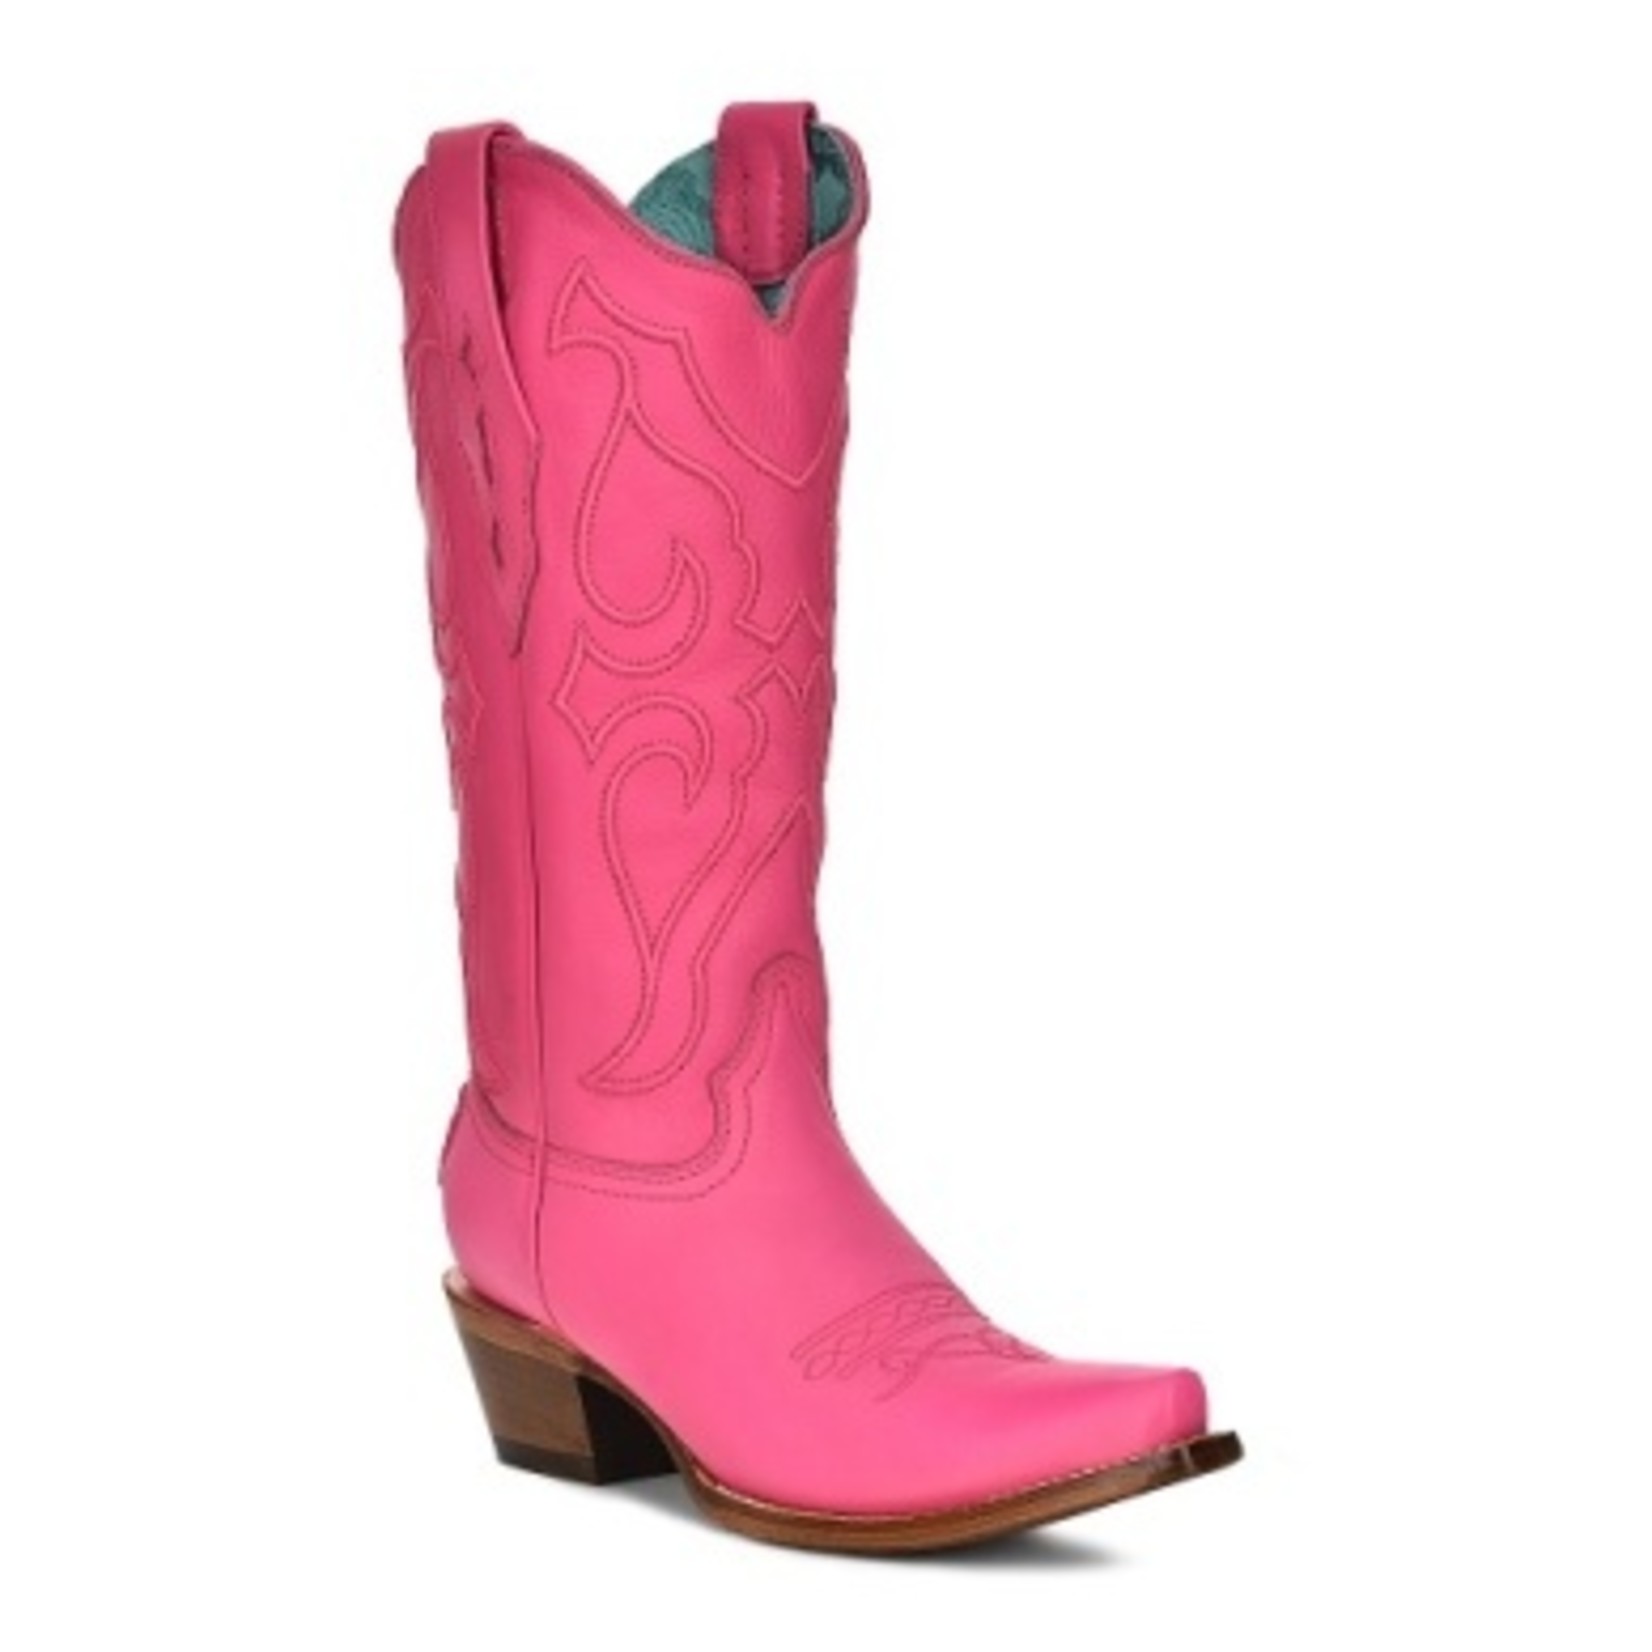 Corral Boots Lds Fuchsia Embroidery